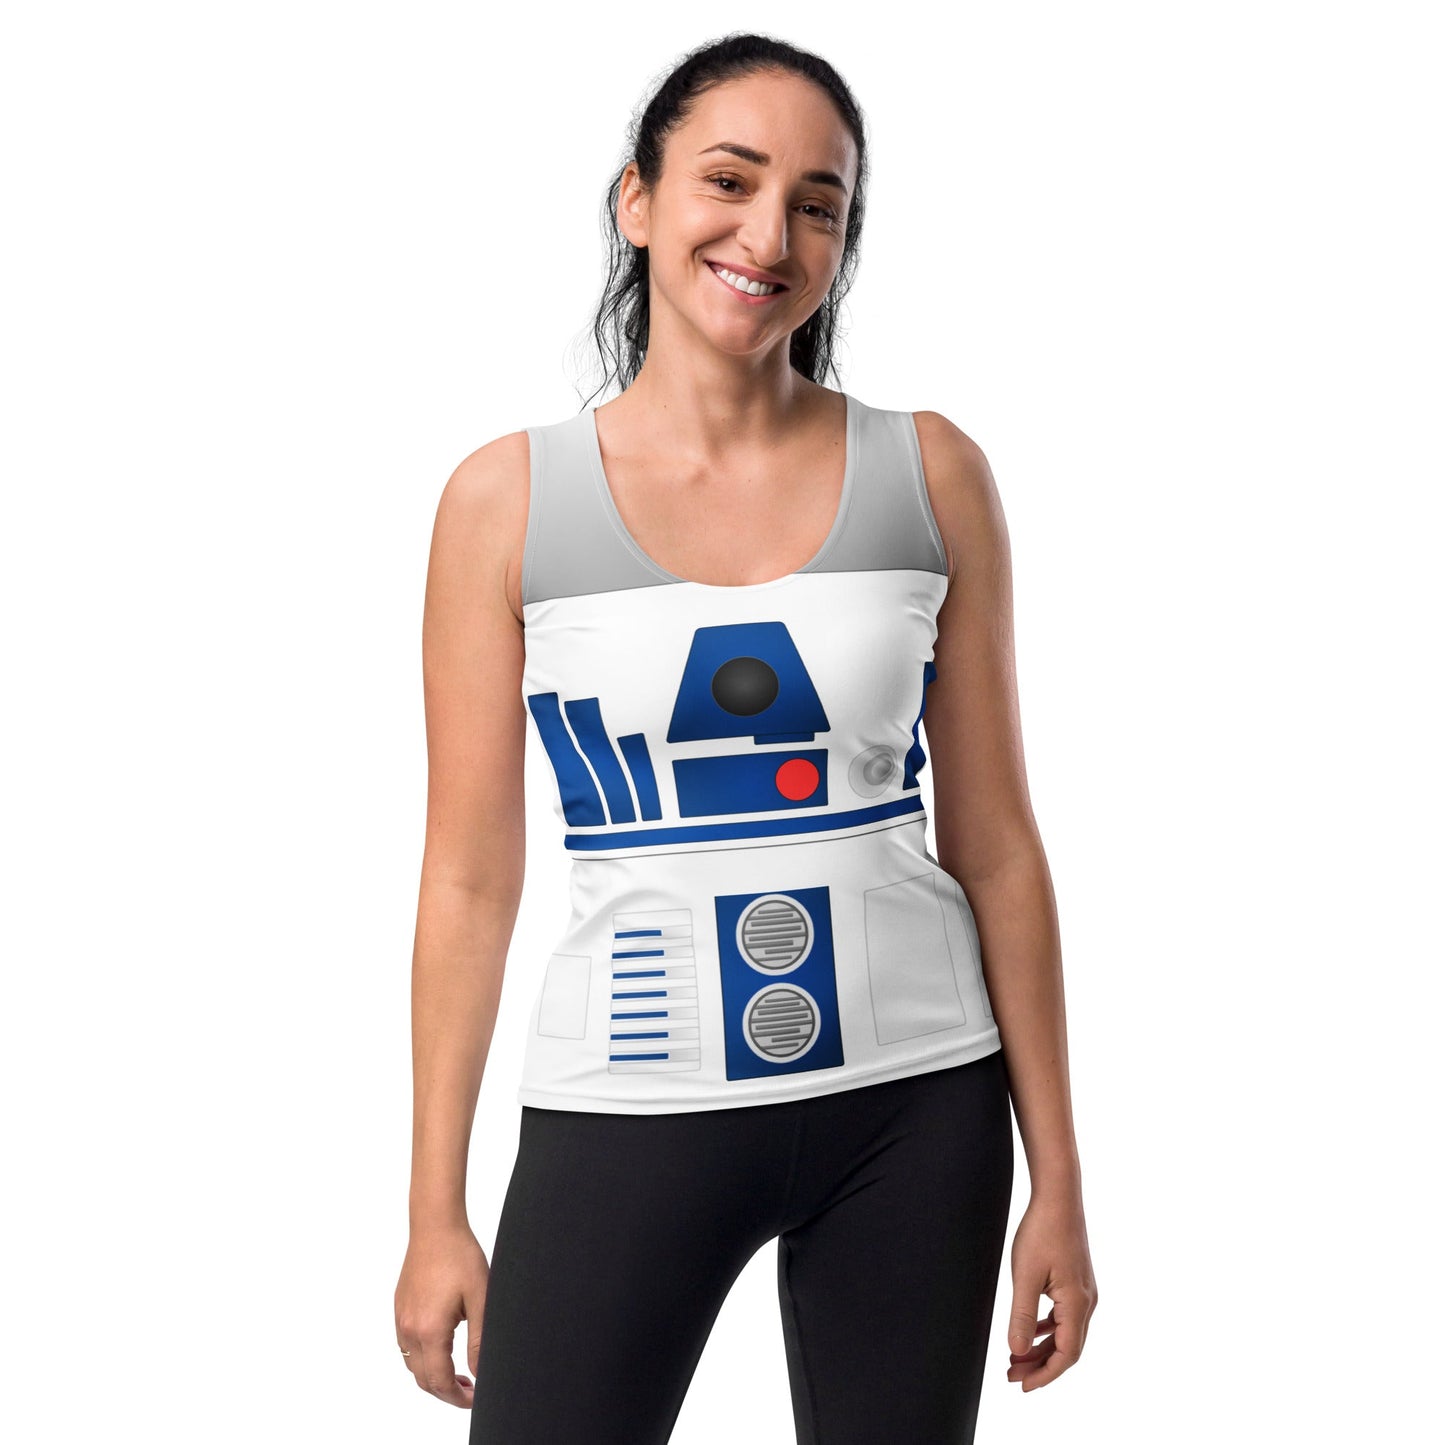 The Droid Tank Top adult cosplayadult r2d2 costumeWrong Lever Clothing